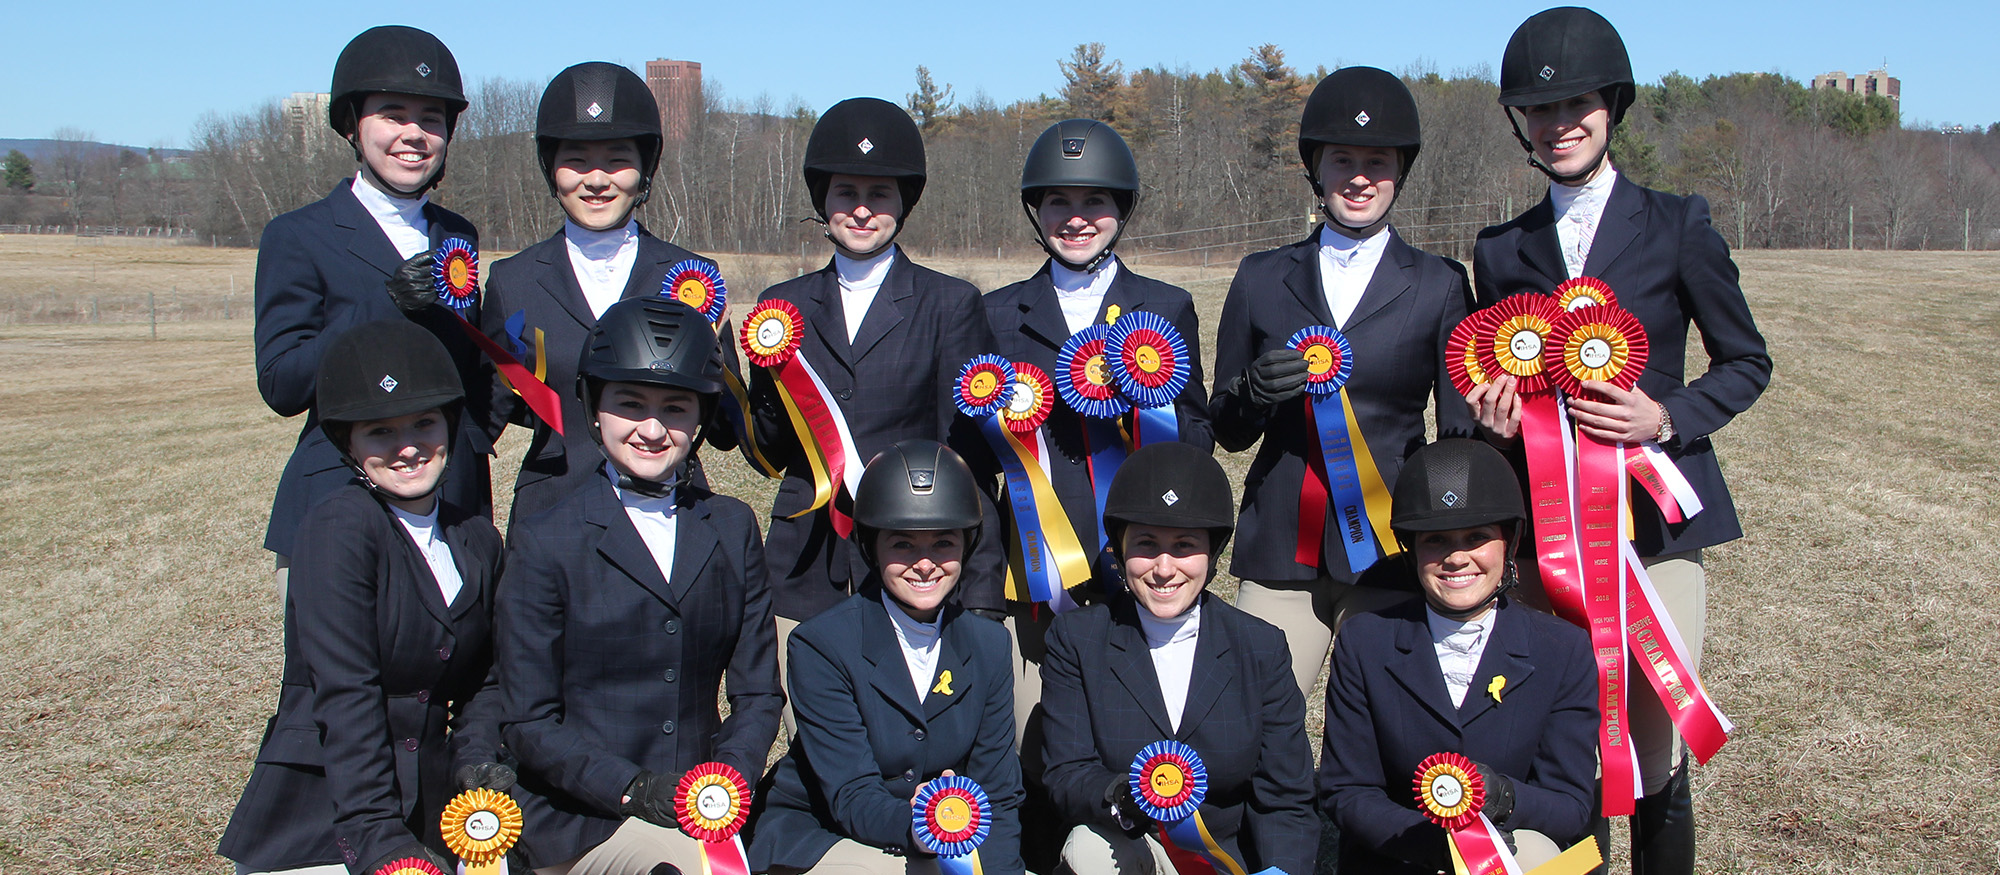 Group photo of the Lyons riding team following competition at the Regional Championships